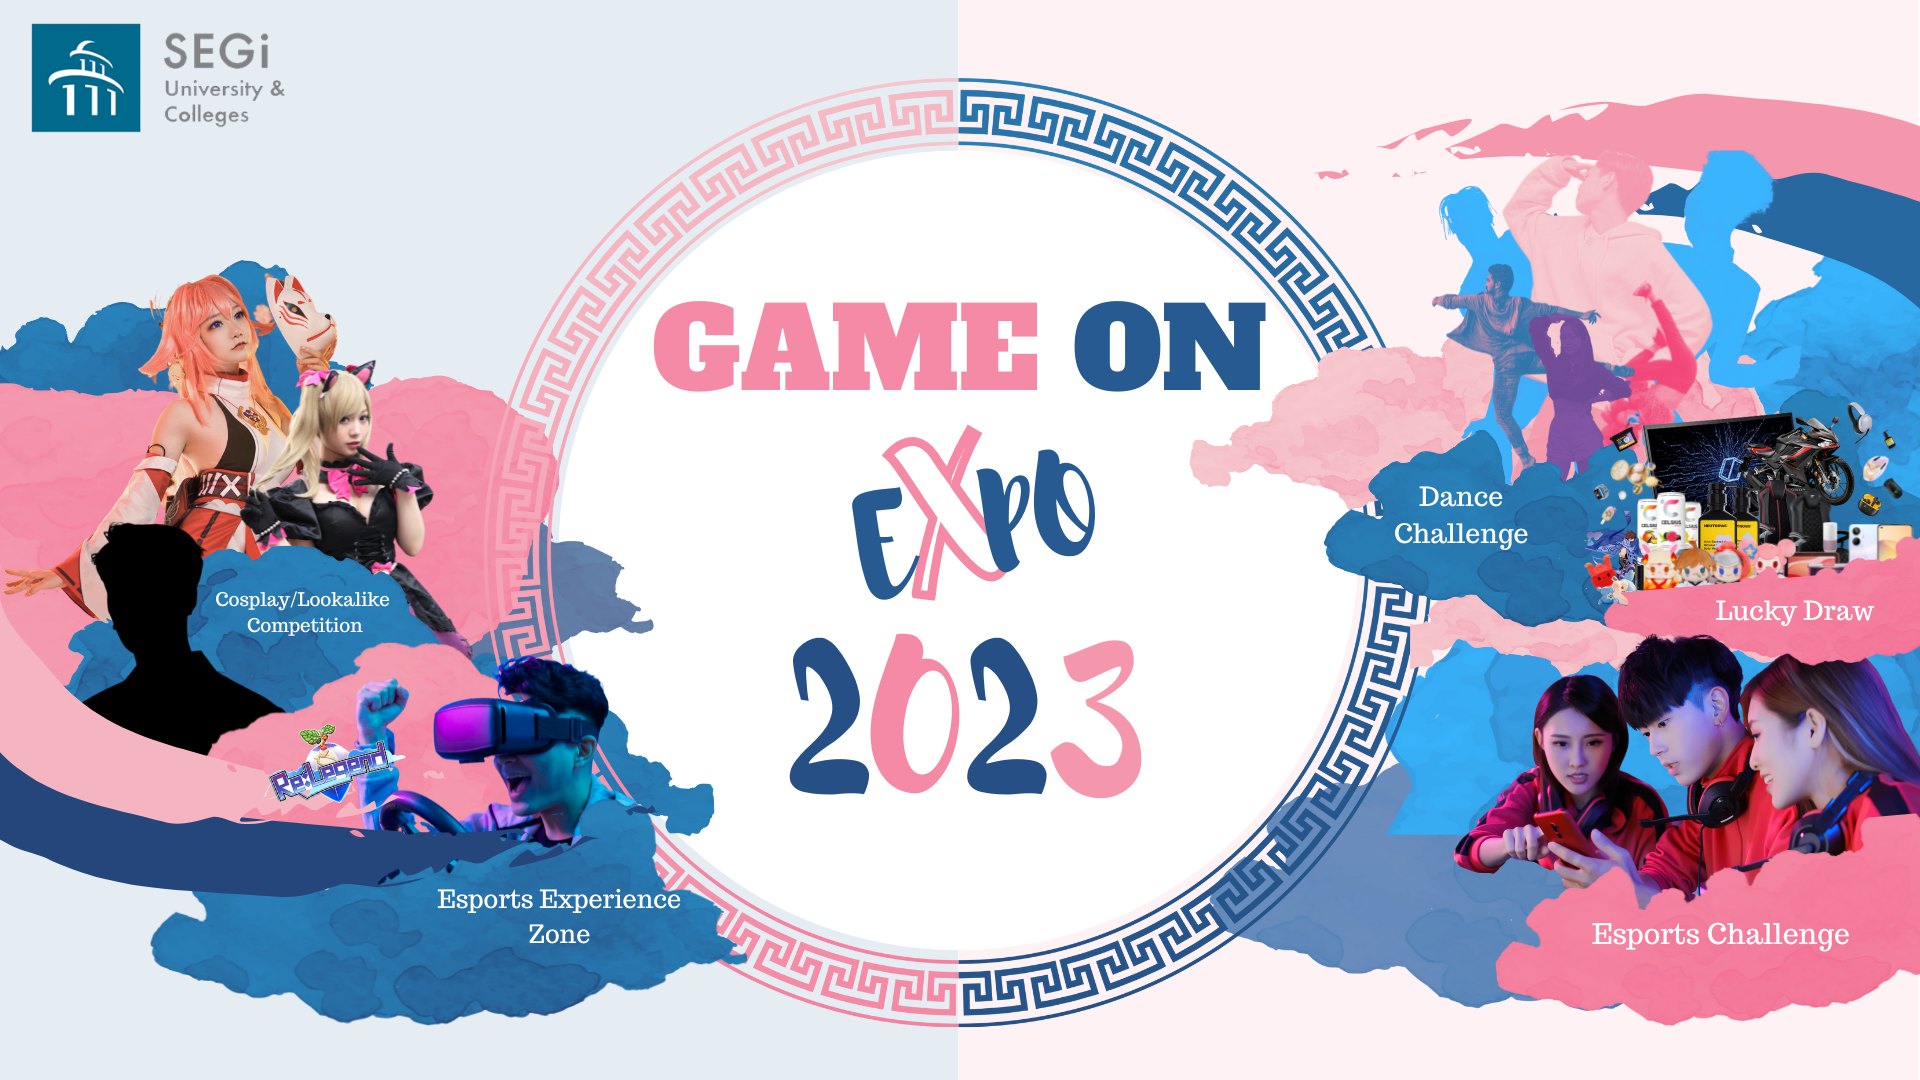 SEGi University Game On Expo returns for the second year